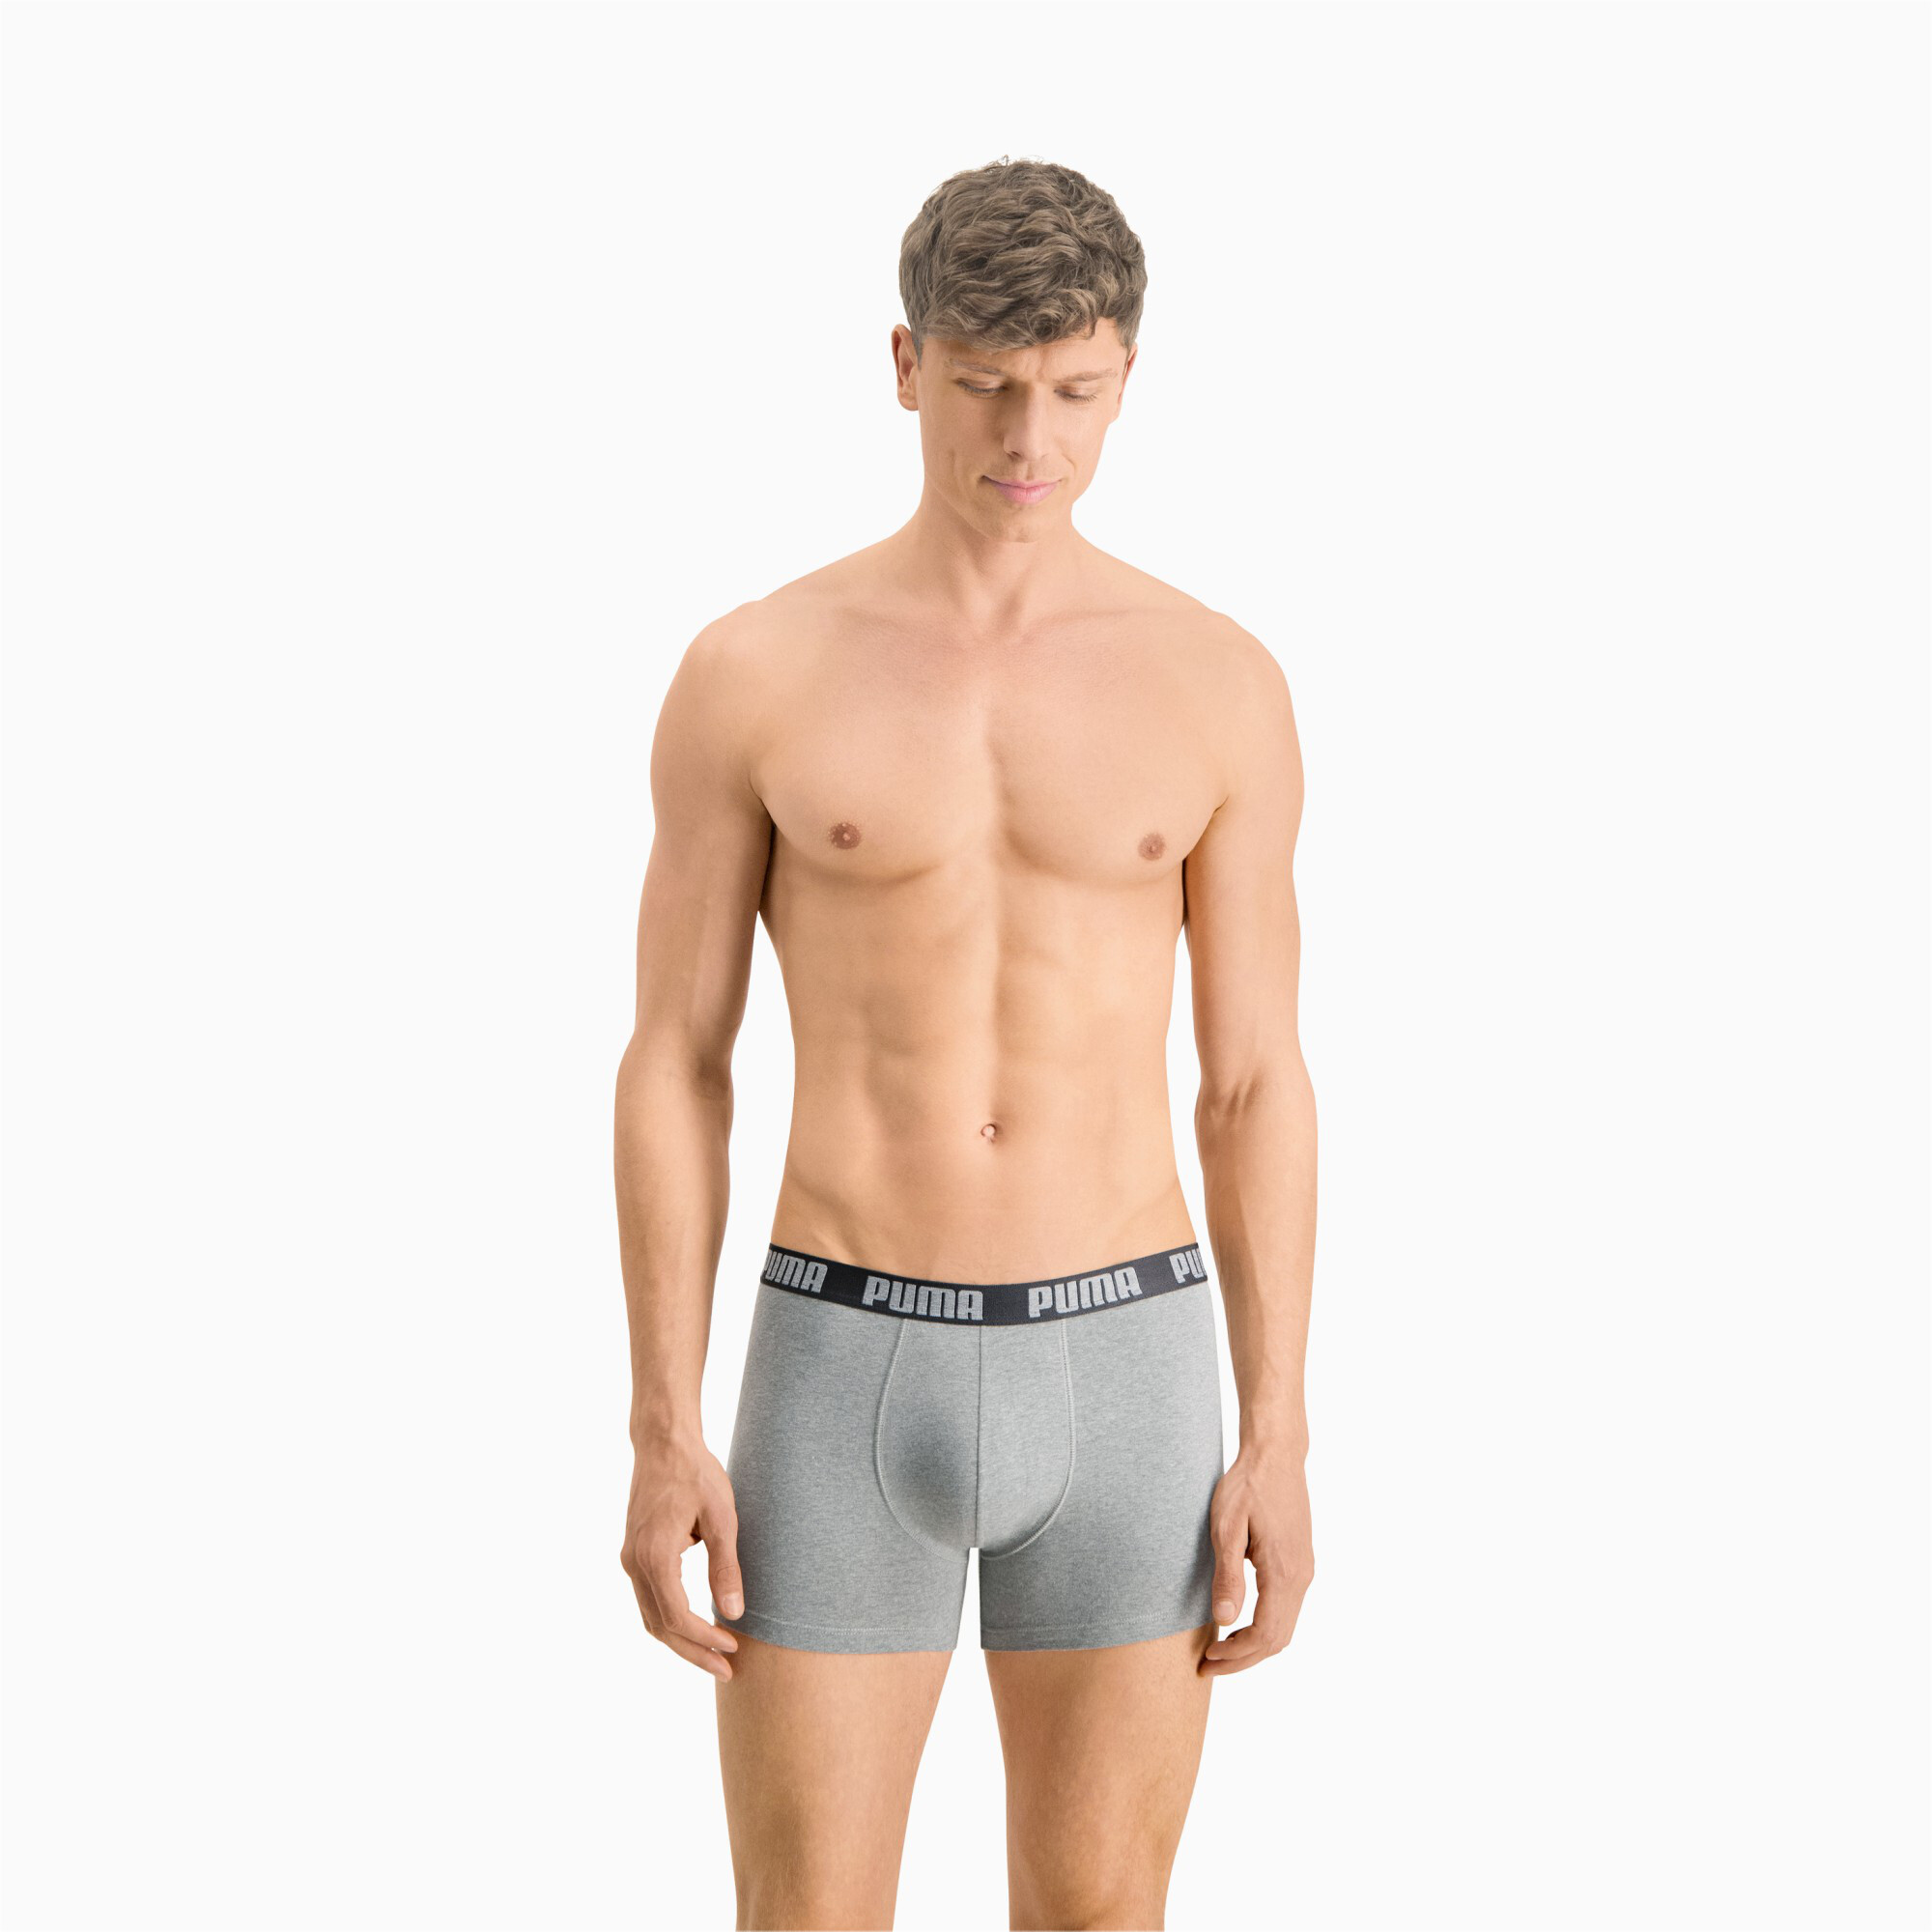 Men's PUMA Everyday Boxers 3 Pack In Black Grey Combo, Size Small